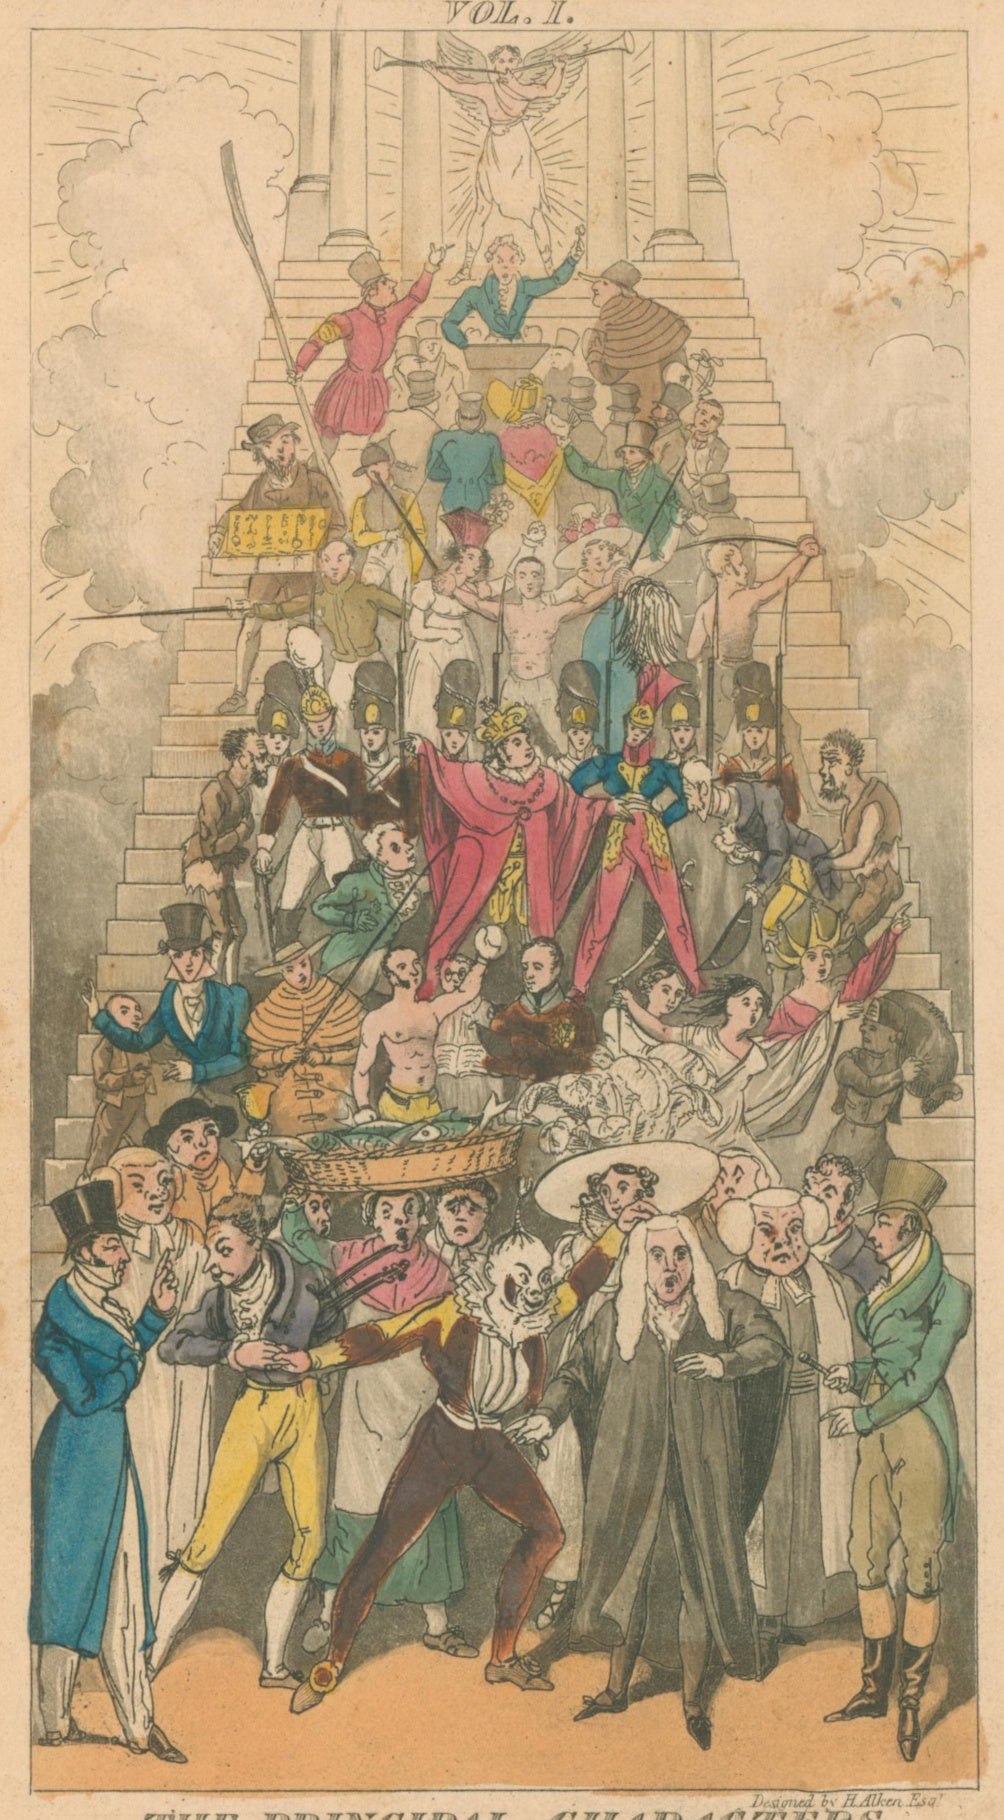 Cruikshank, Isaac, Robert & George.  “The Principal Characters presented to Public Exhibition throughout Real Life in London” Frontispiece. Vol. I